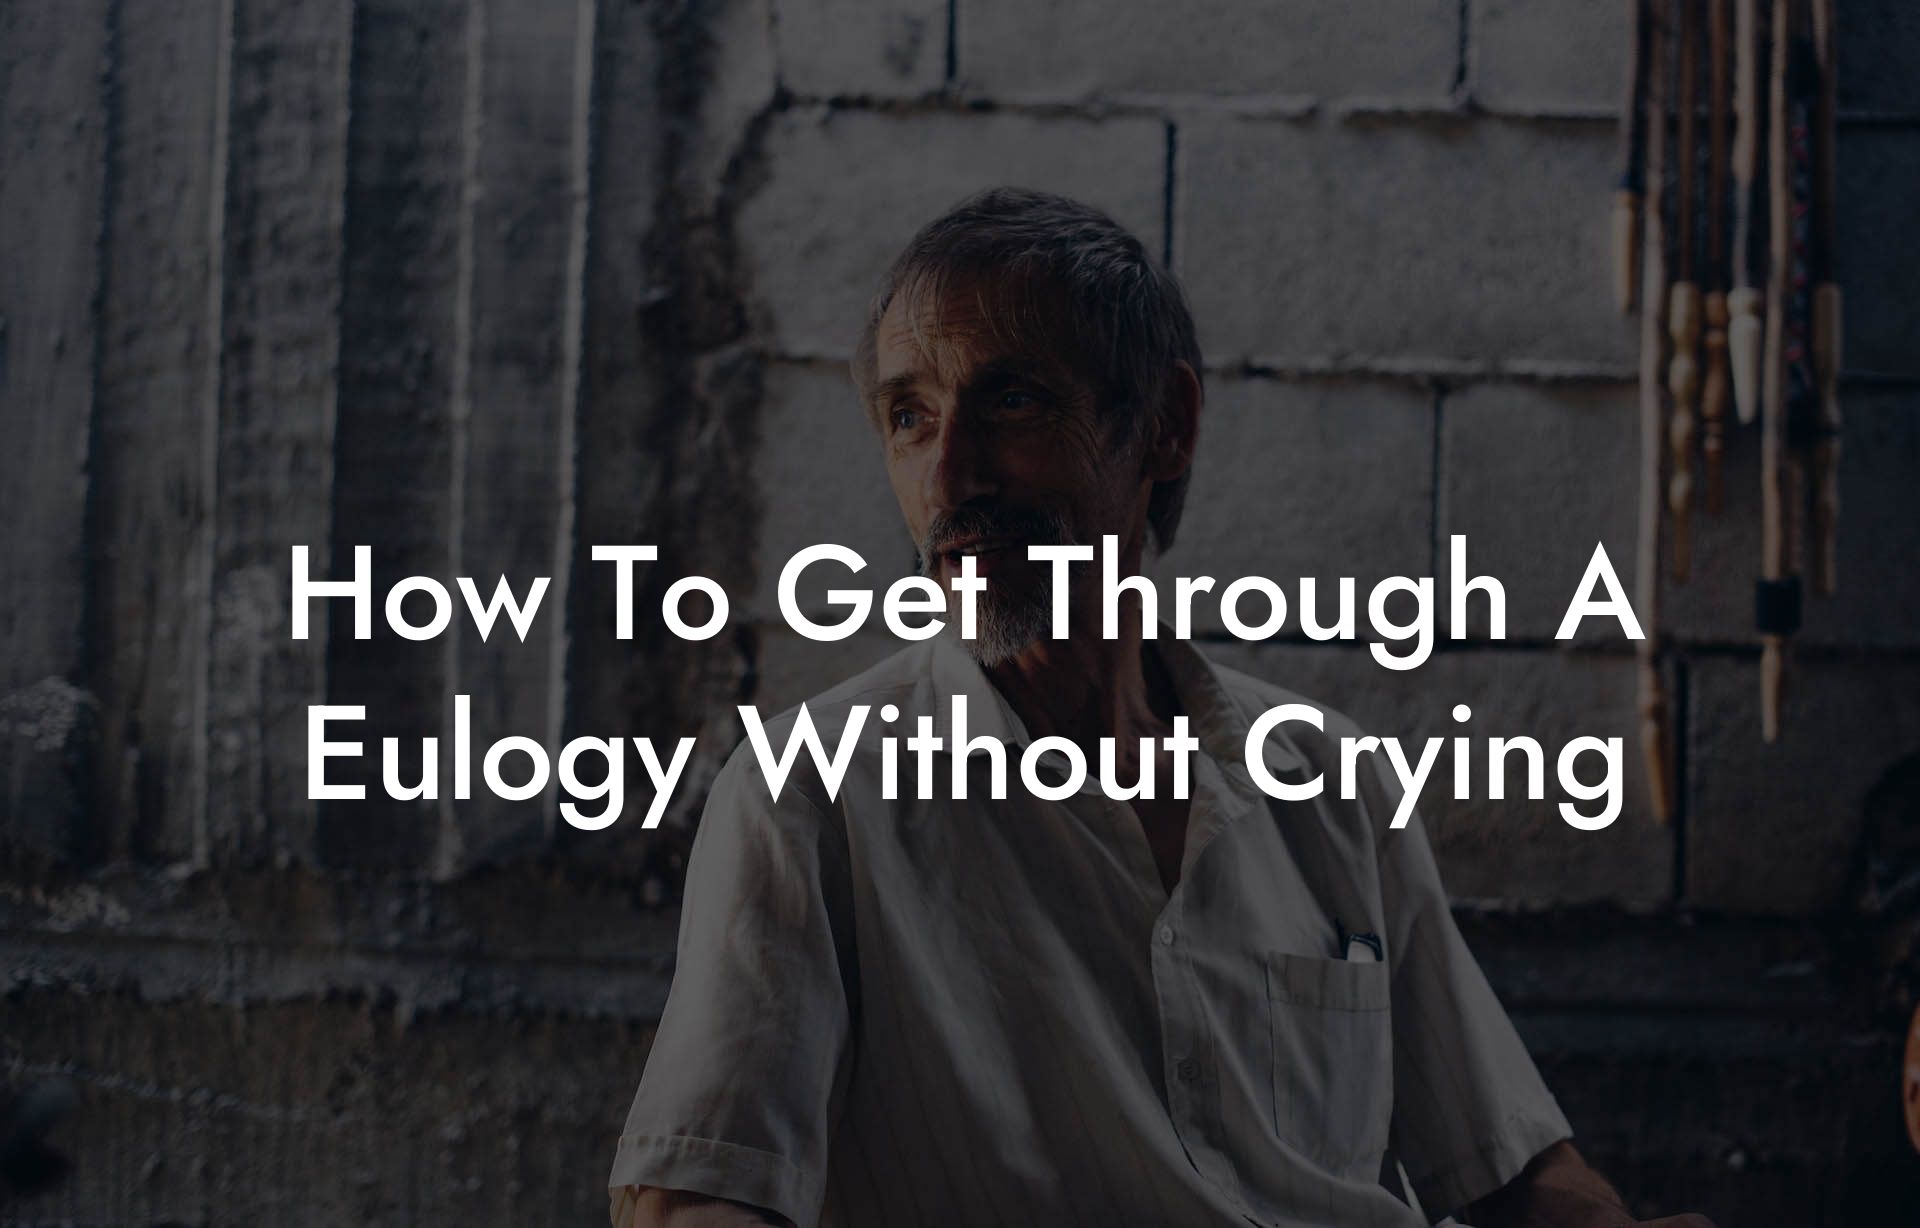 How To Get Through A Eulogy Without Crying